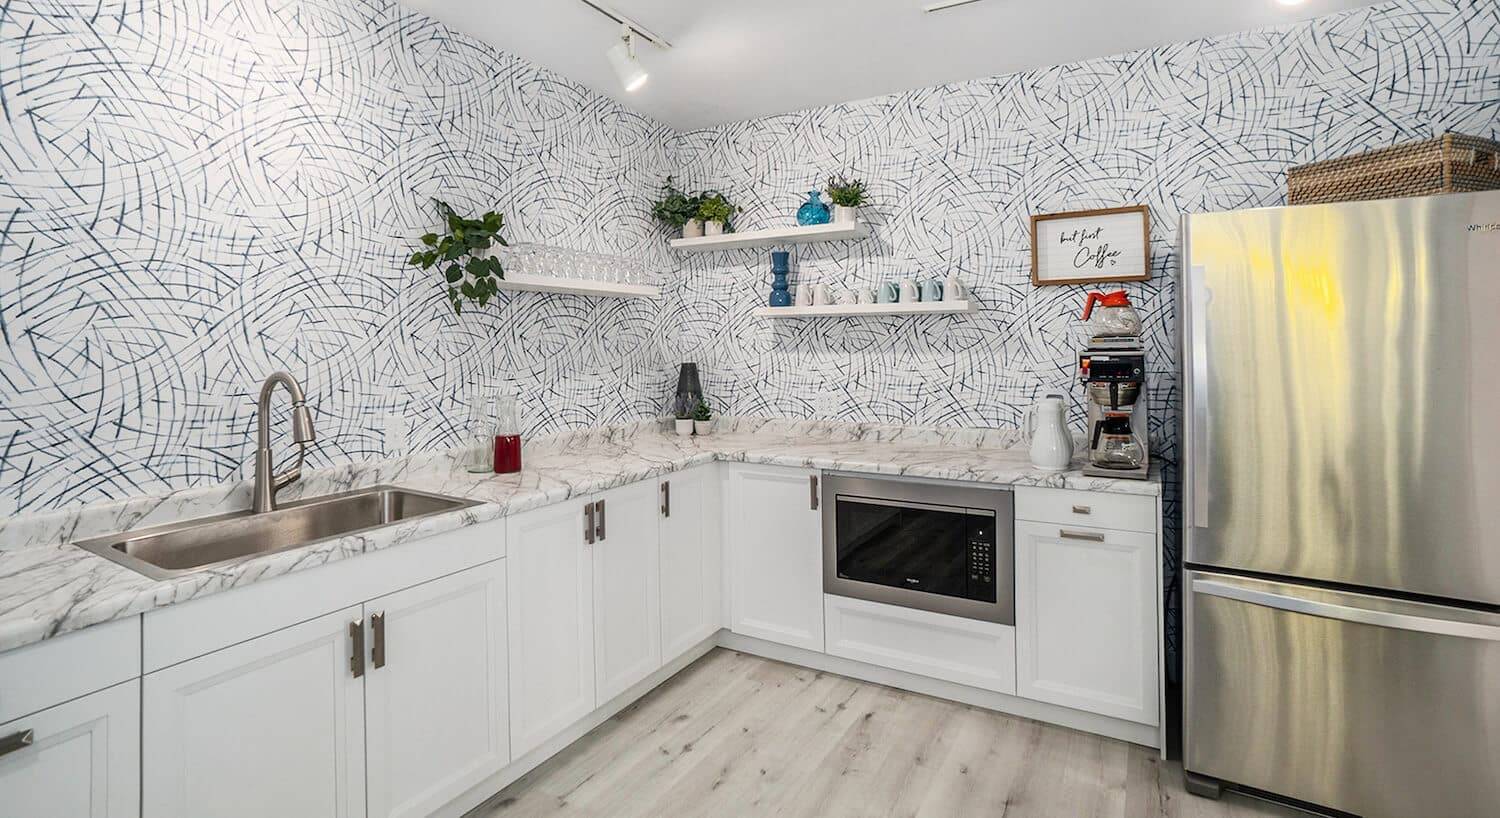 A kitchen with blue and white wallpaper, white cupboards, granite countertops, and stainless steel appliances